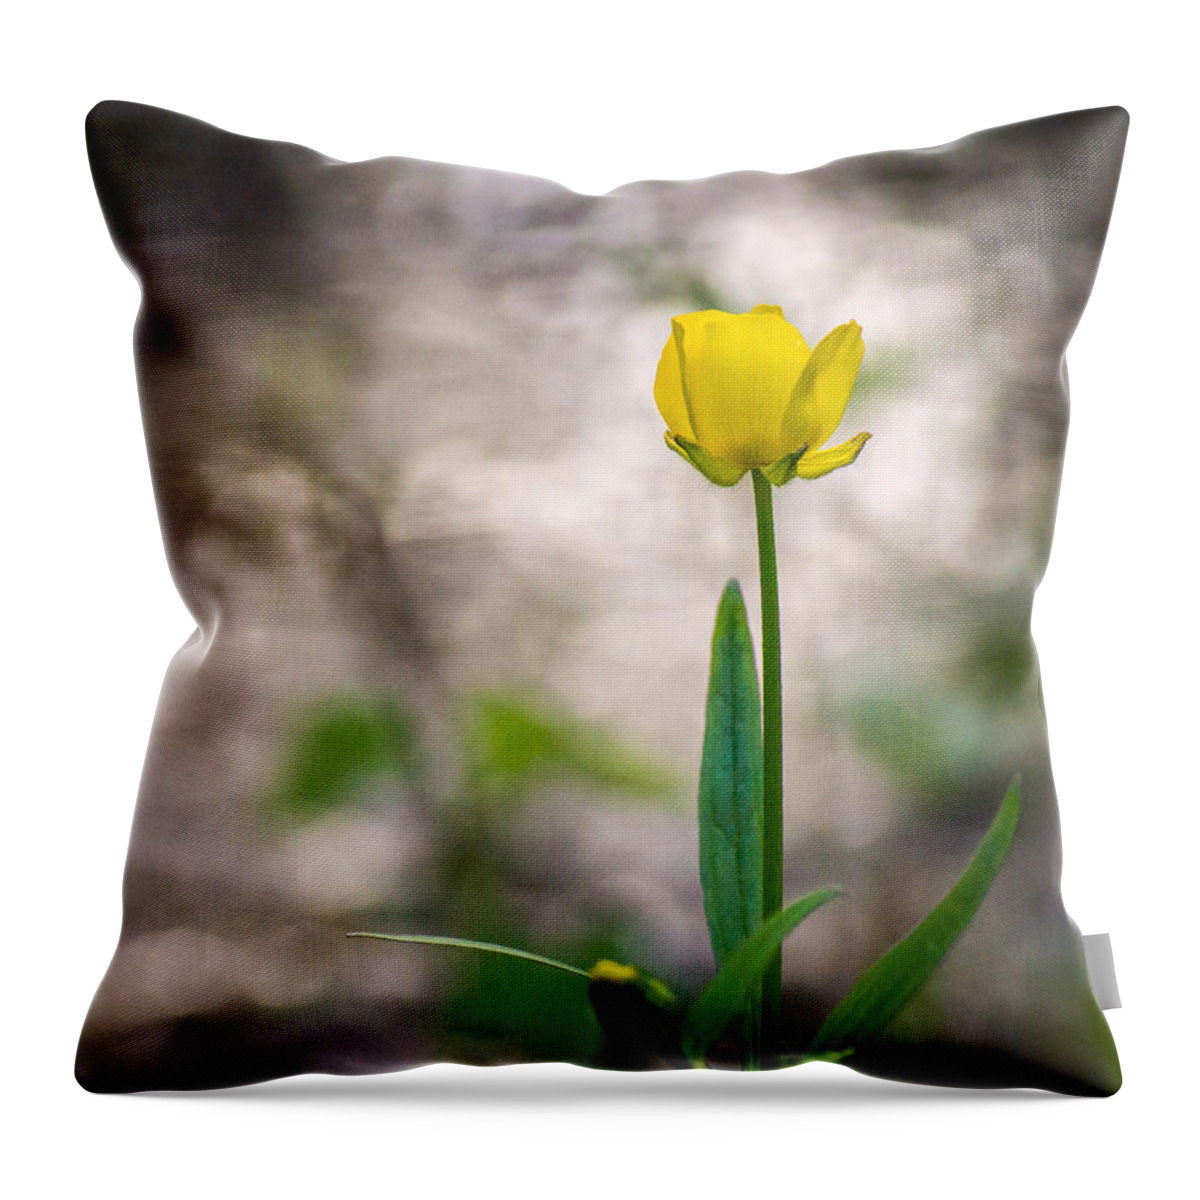 Wildflower Throw Pillow featuring the photograph Simple Spring by Bill Pevlor